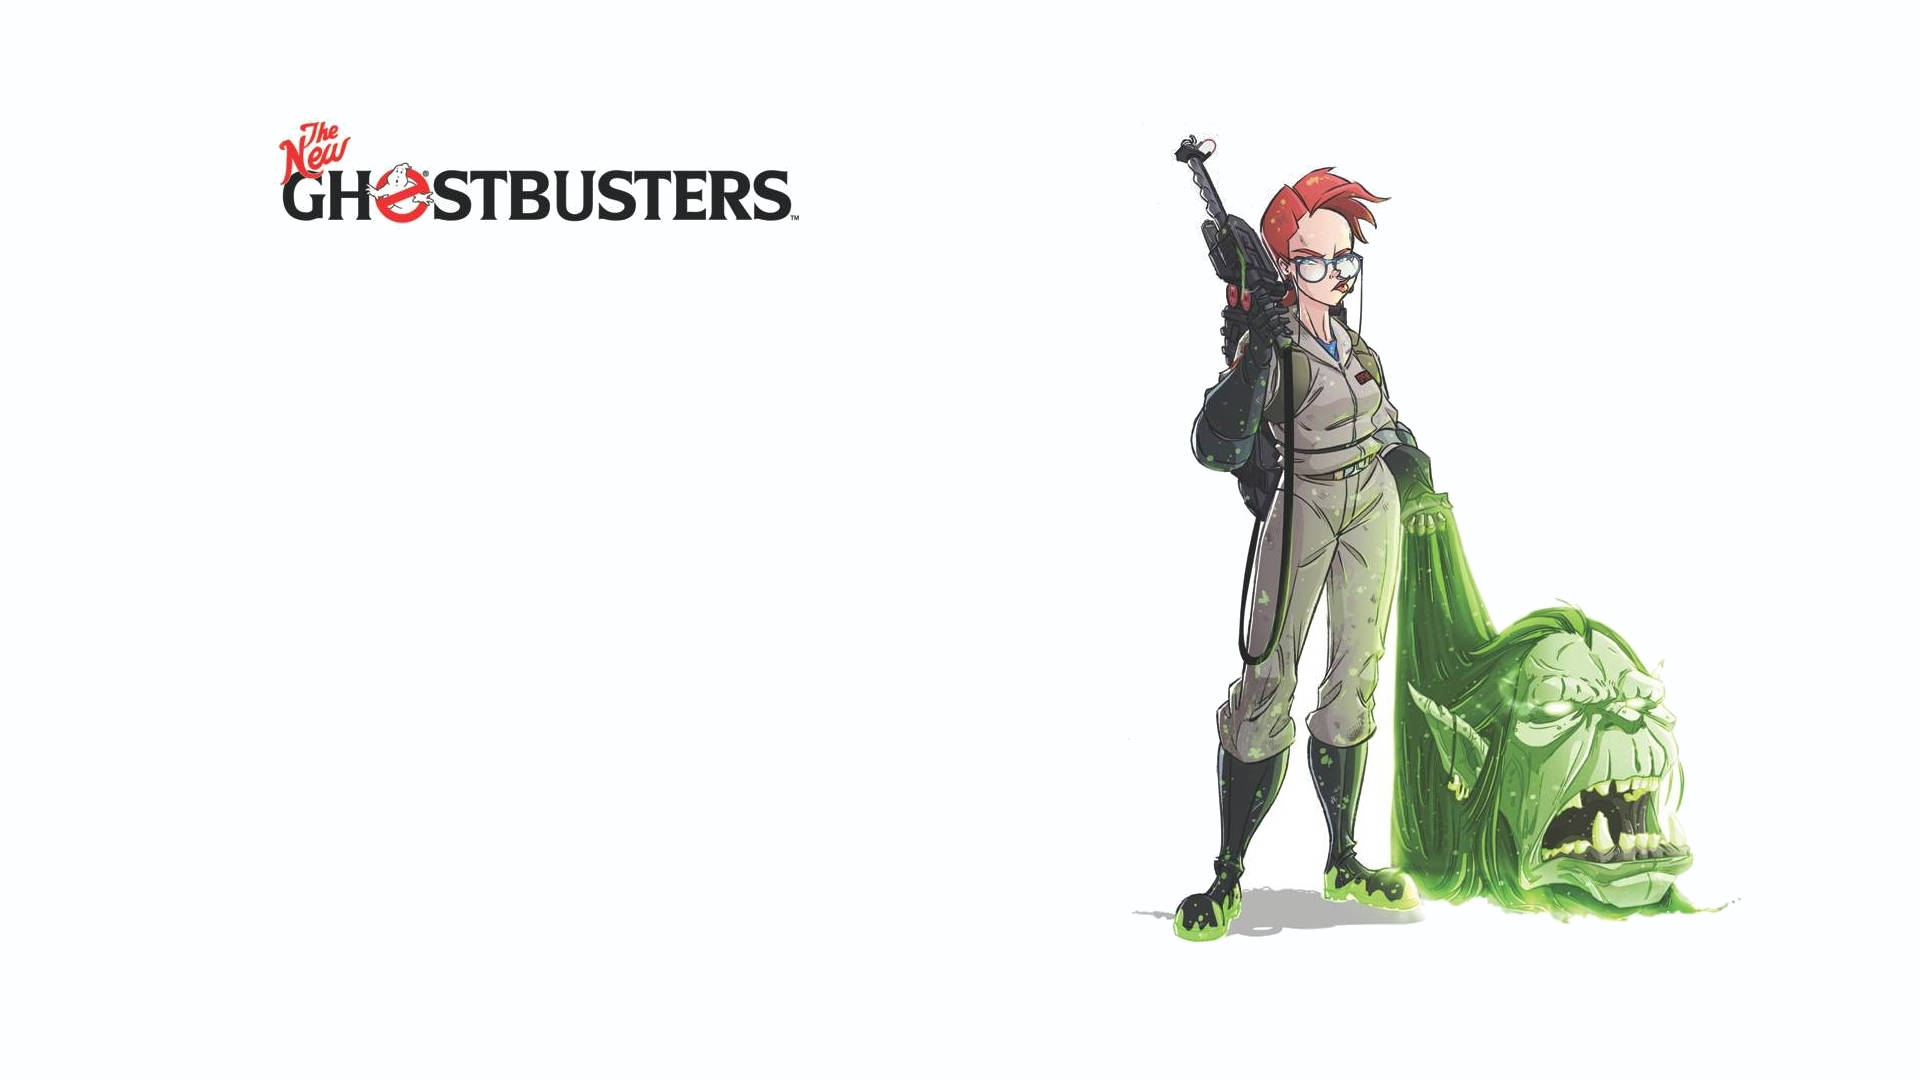 Meet The New Ghostbusters - Ready To Take On Supernatural Feats! Background